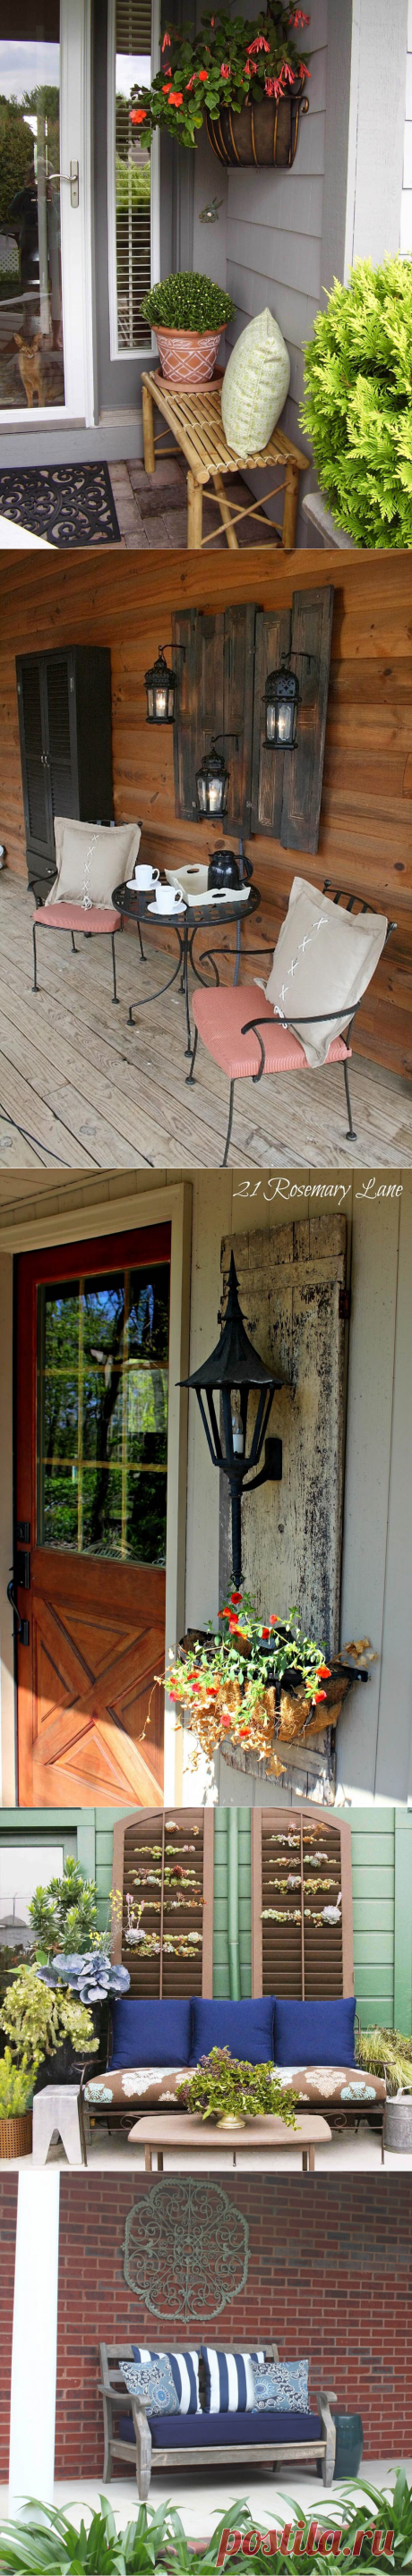 34 Best Porch Wall Decor Ideas and Designs for 2018